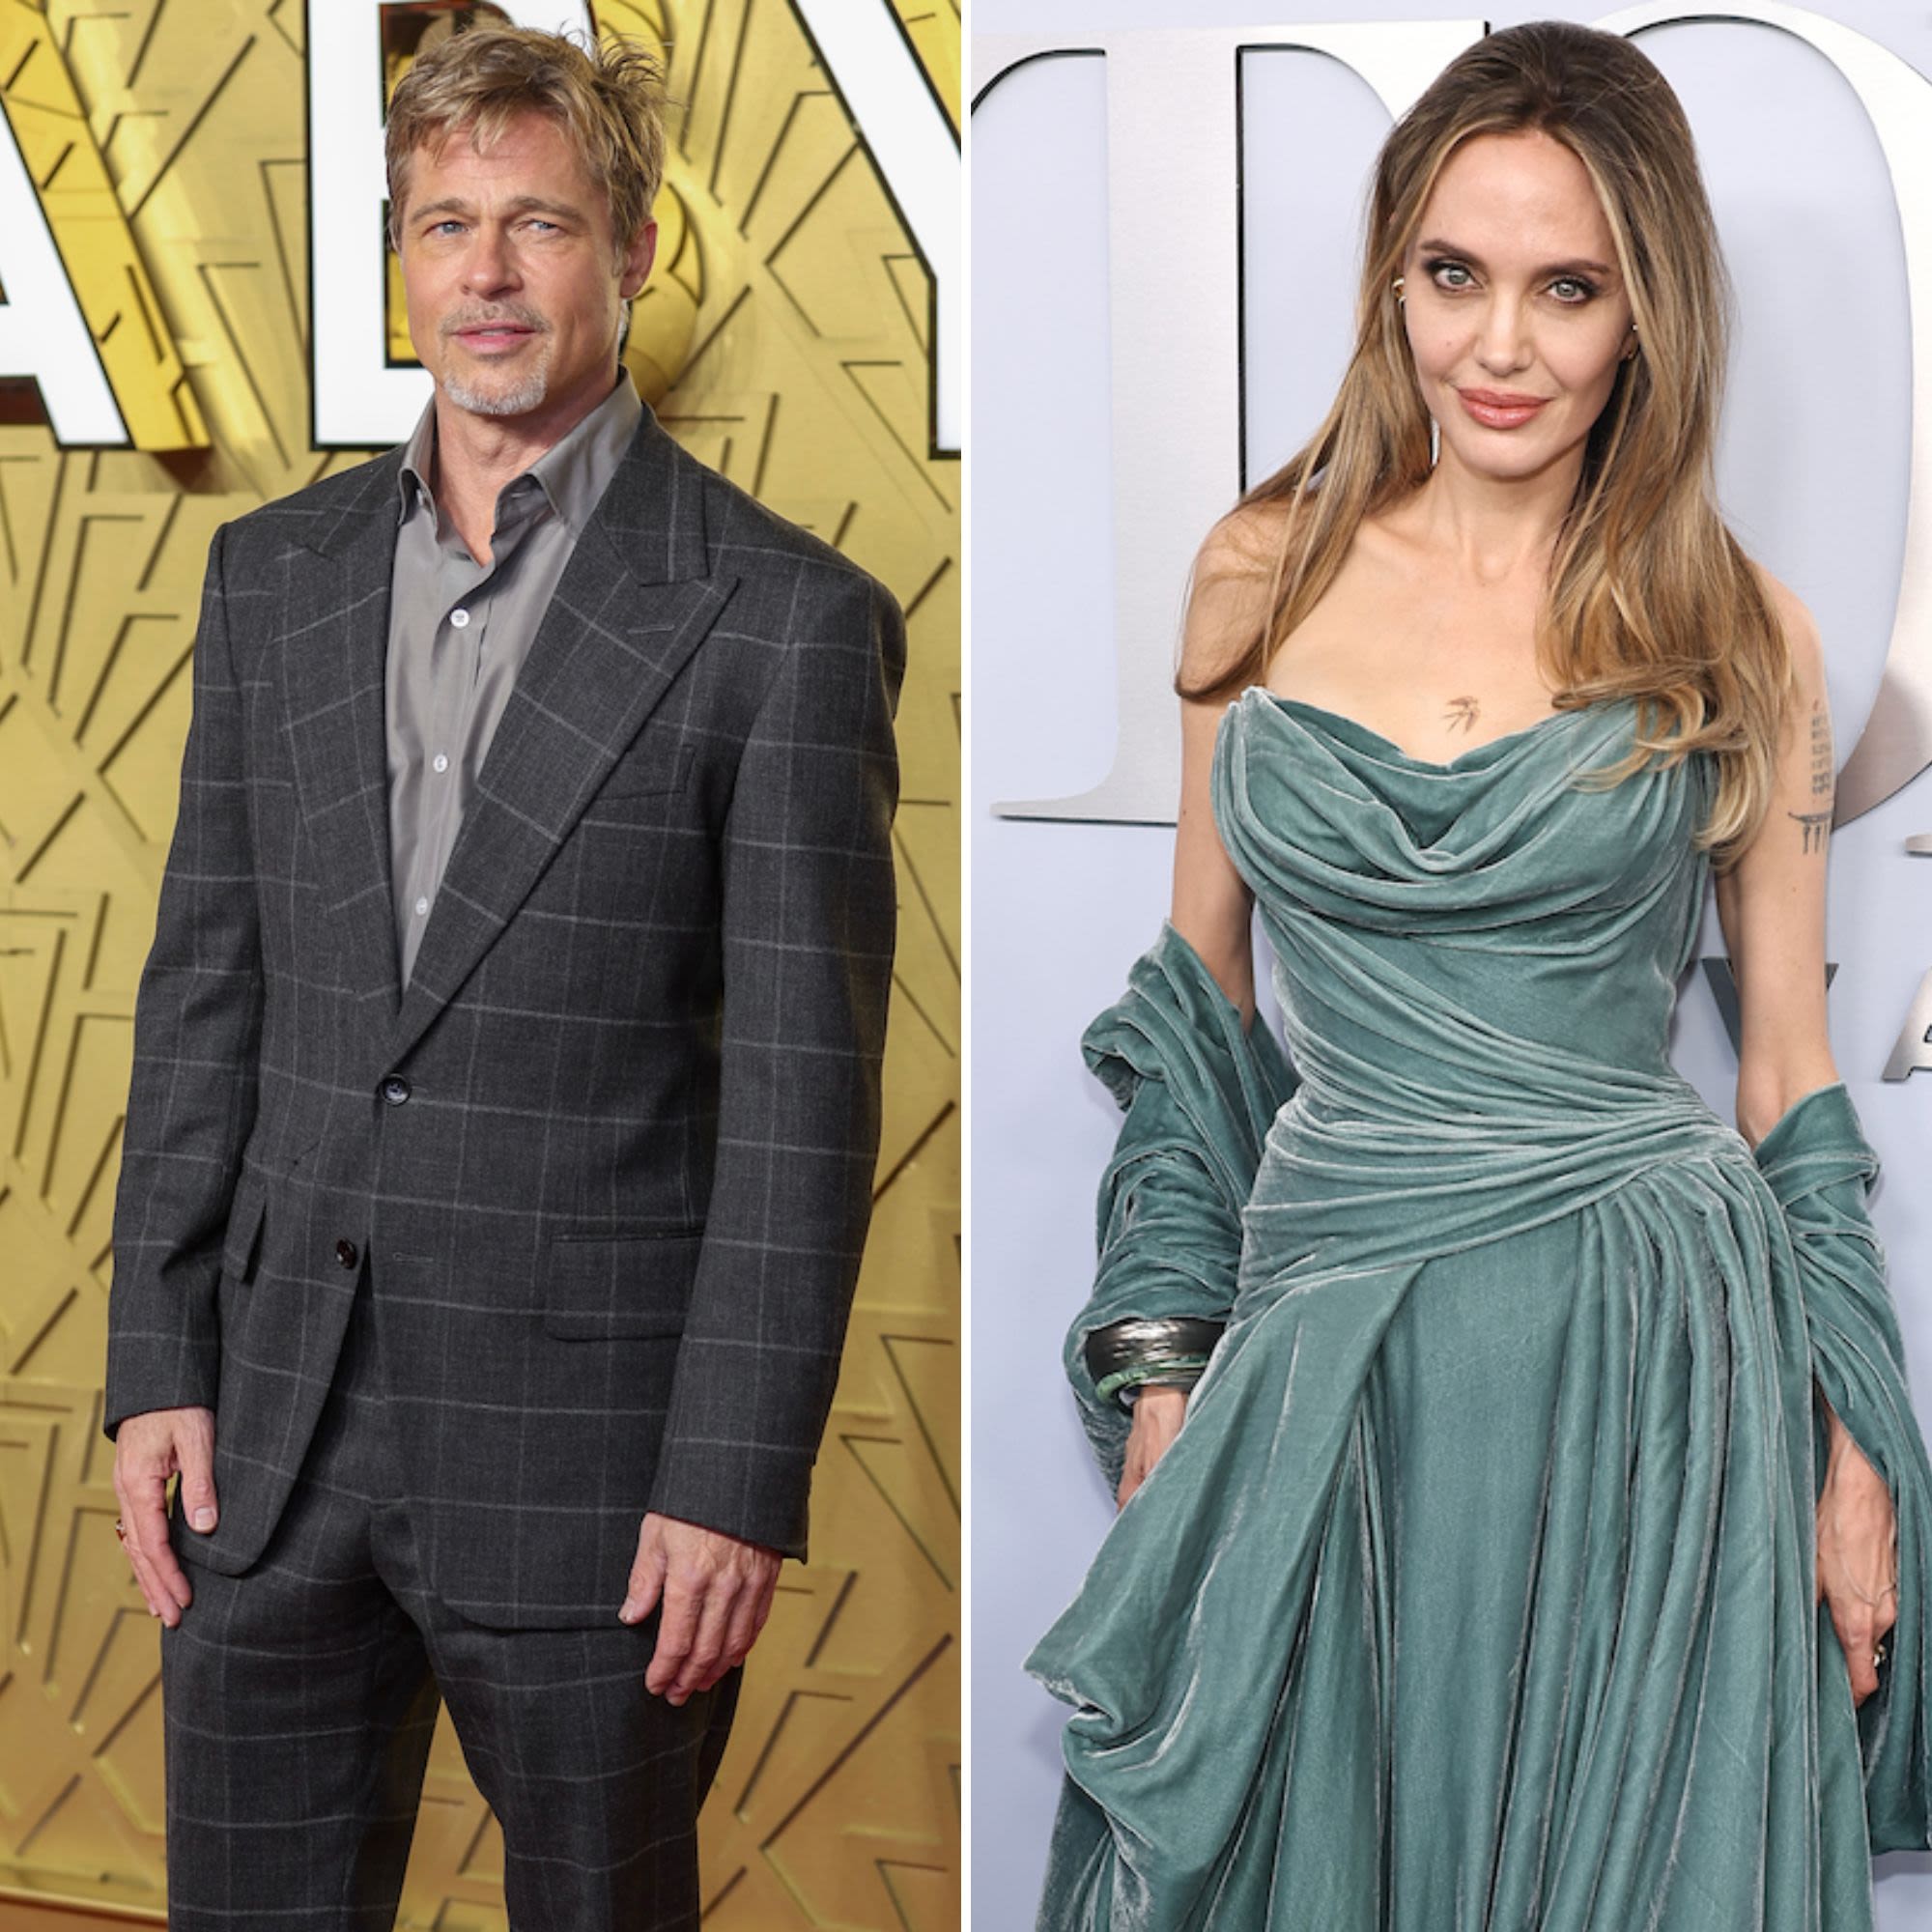 Brad Pitt ‘Spoiling for a Showdown’ With Angelina Jolie, Knows He’d Beat Her in ‘Popularity Contest’